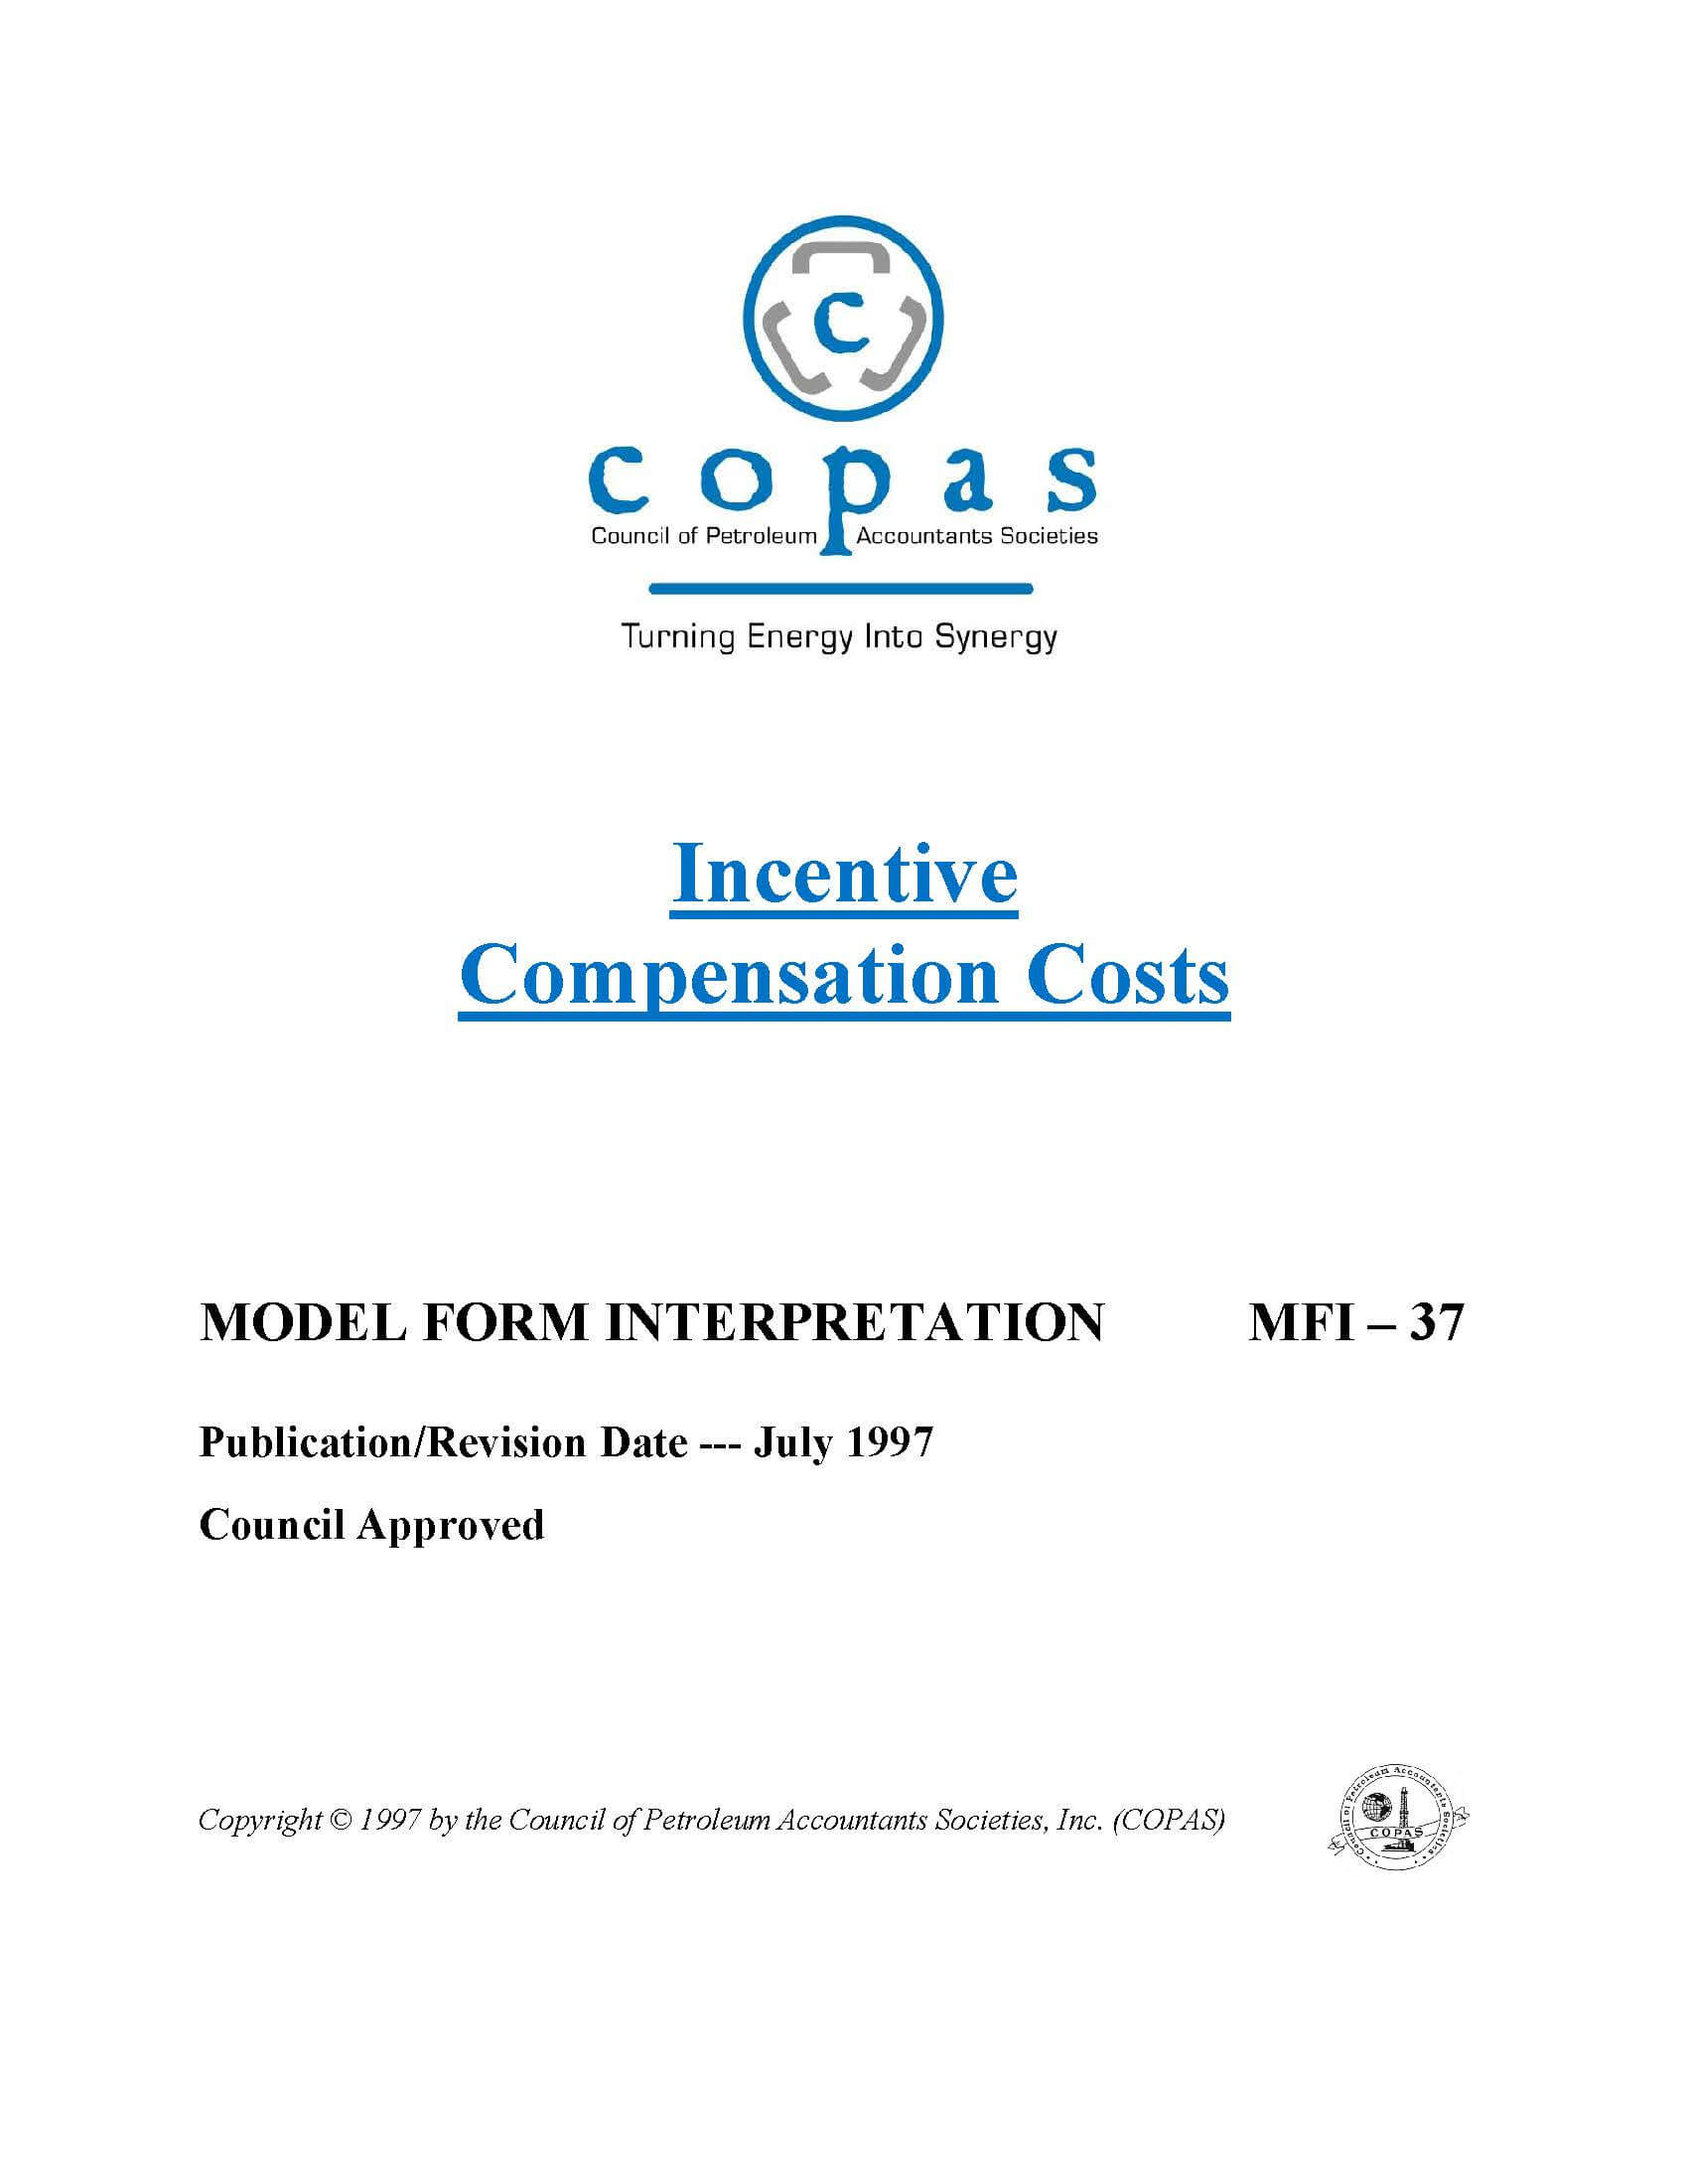 MFI-37 Incentive Compensation Costs - products MFI 37 Incentive Compensation Costs - Council of Petroleum Accountants Societies